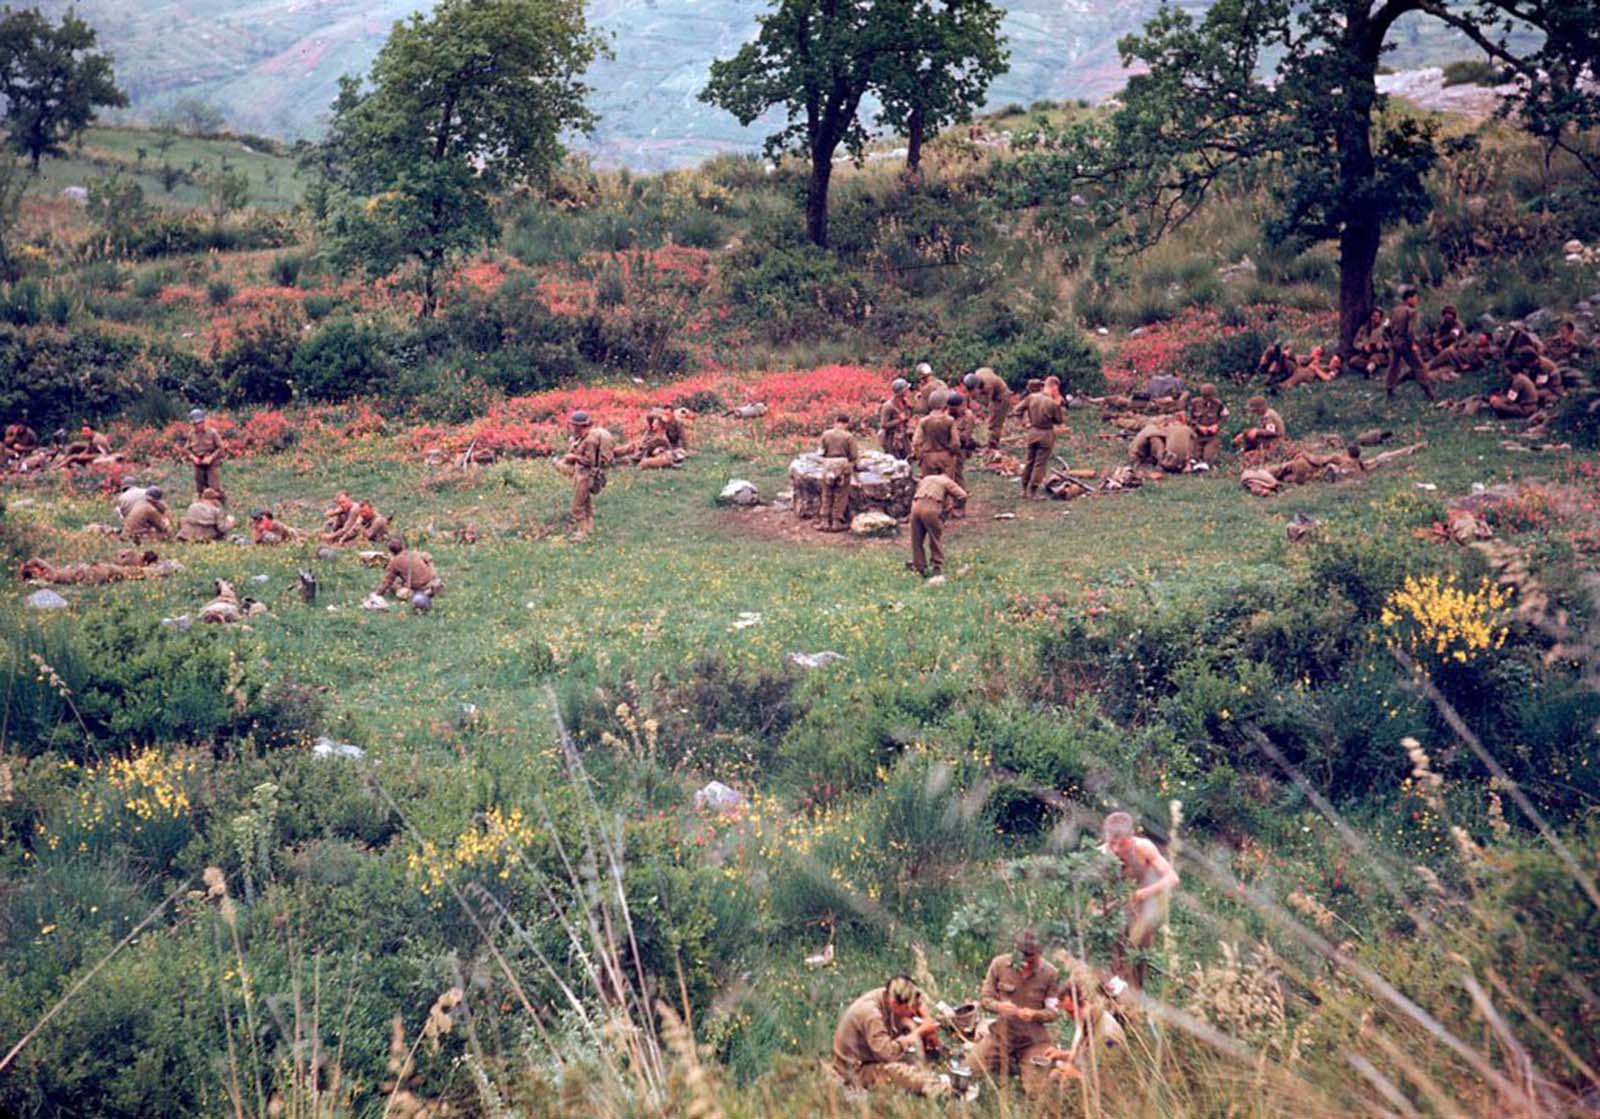 American troops rested in a field during the drive towards Rome, 1944.